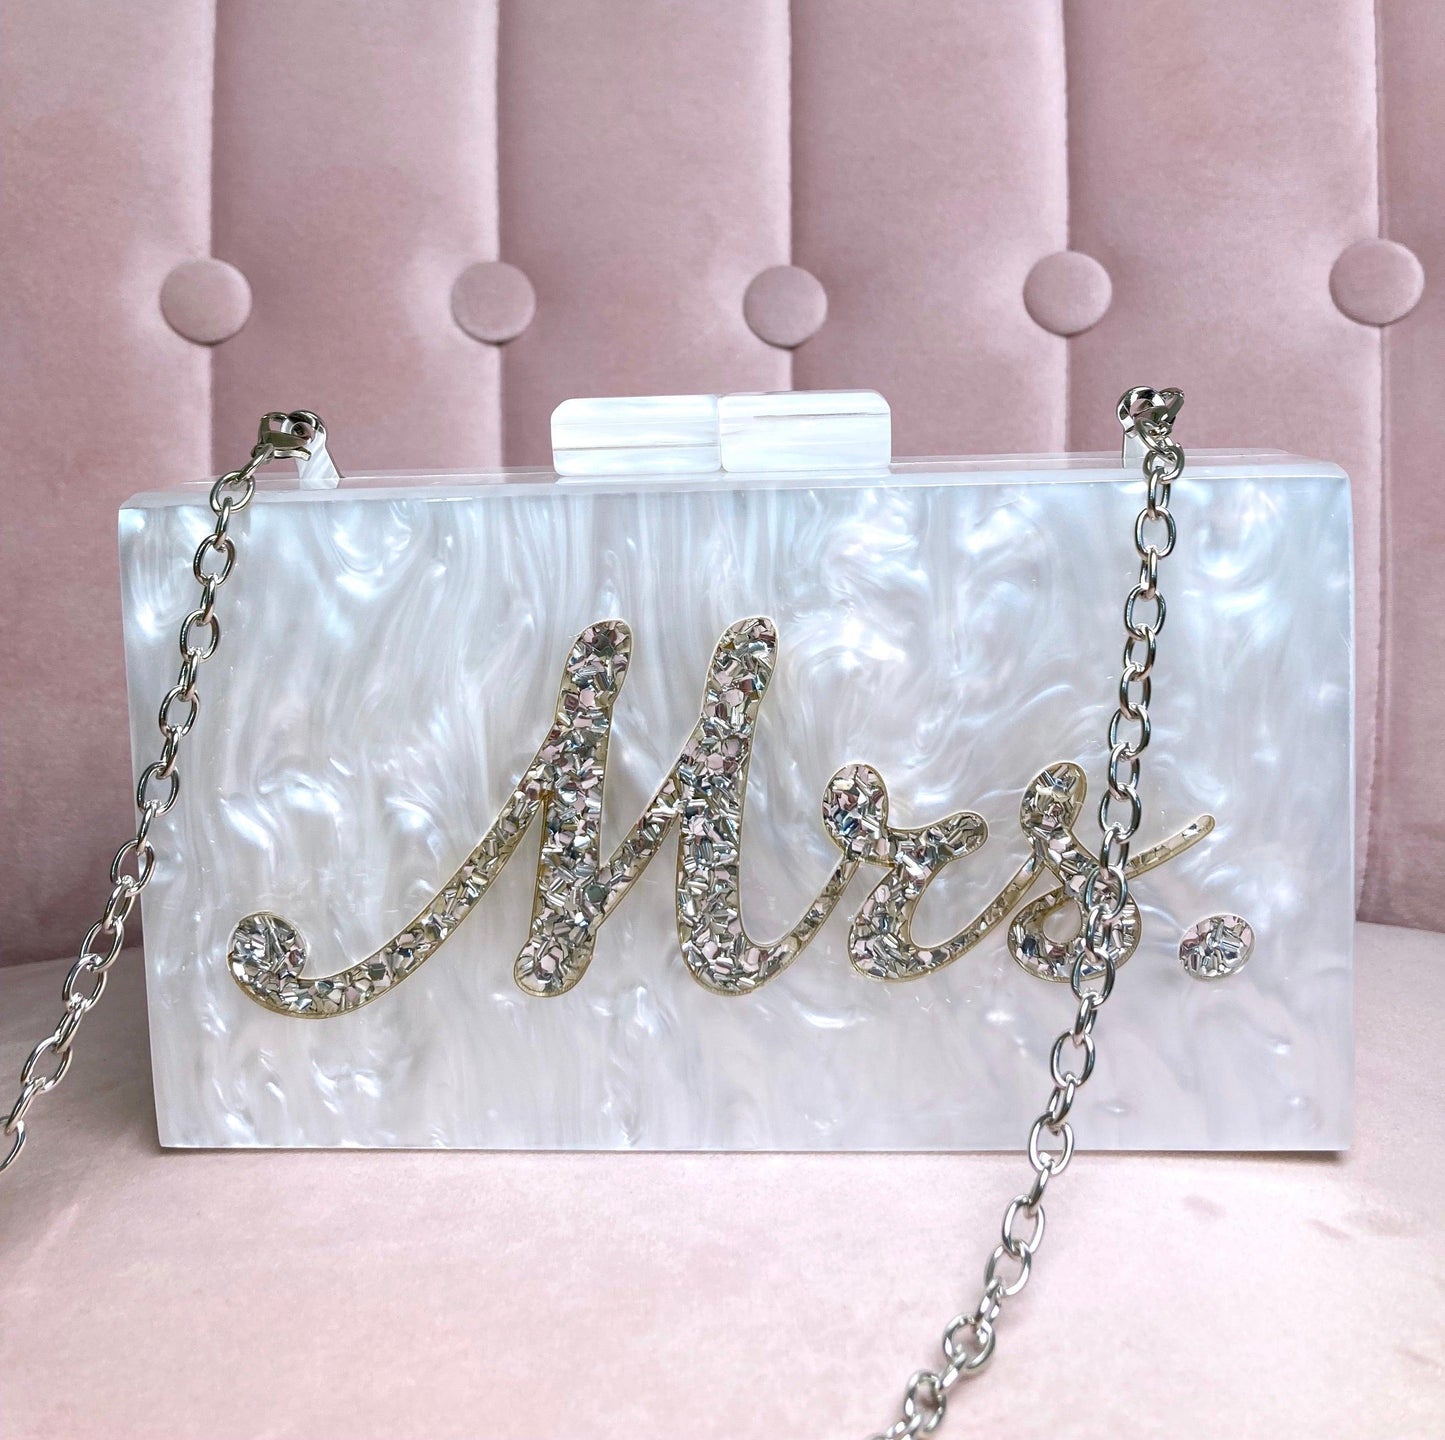 newlywed statement accessory with silver lettering mrs clutch bag & chain